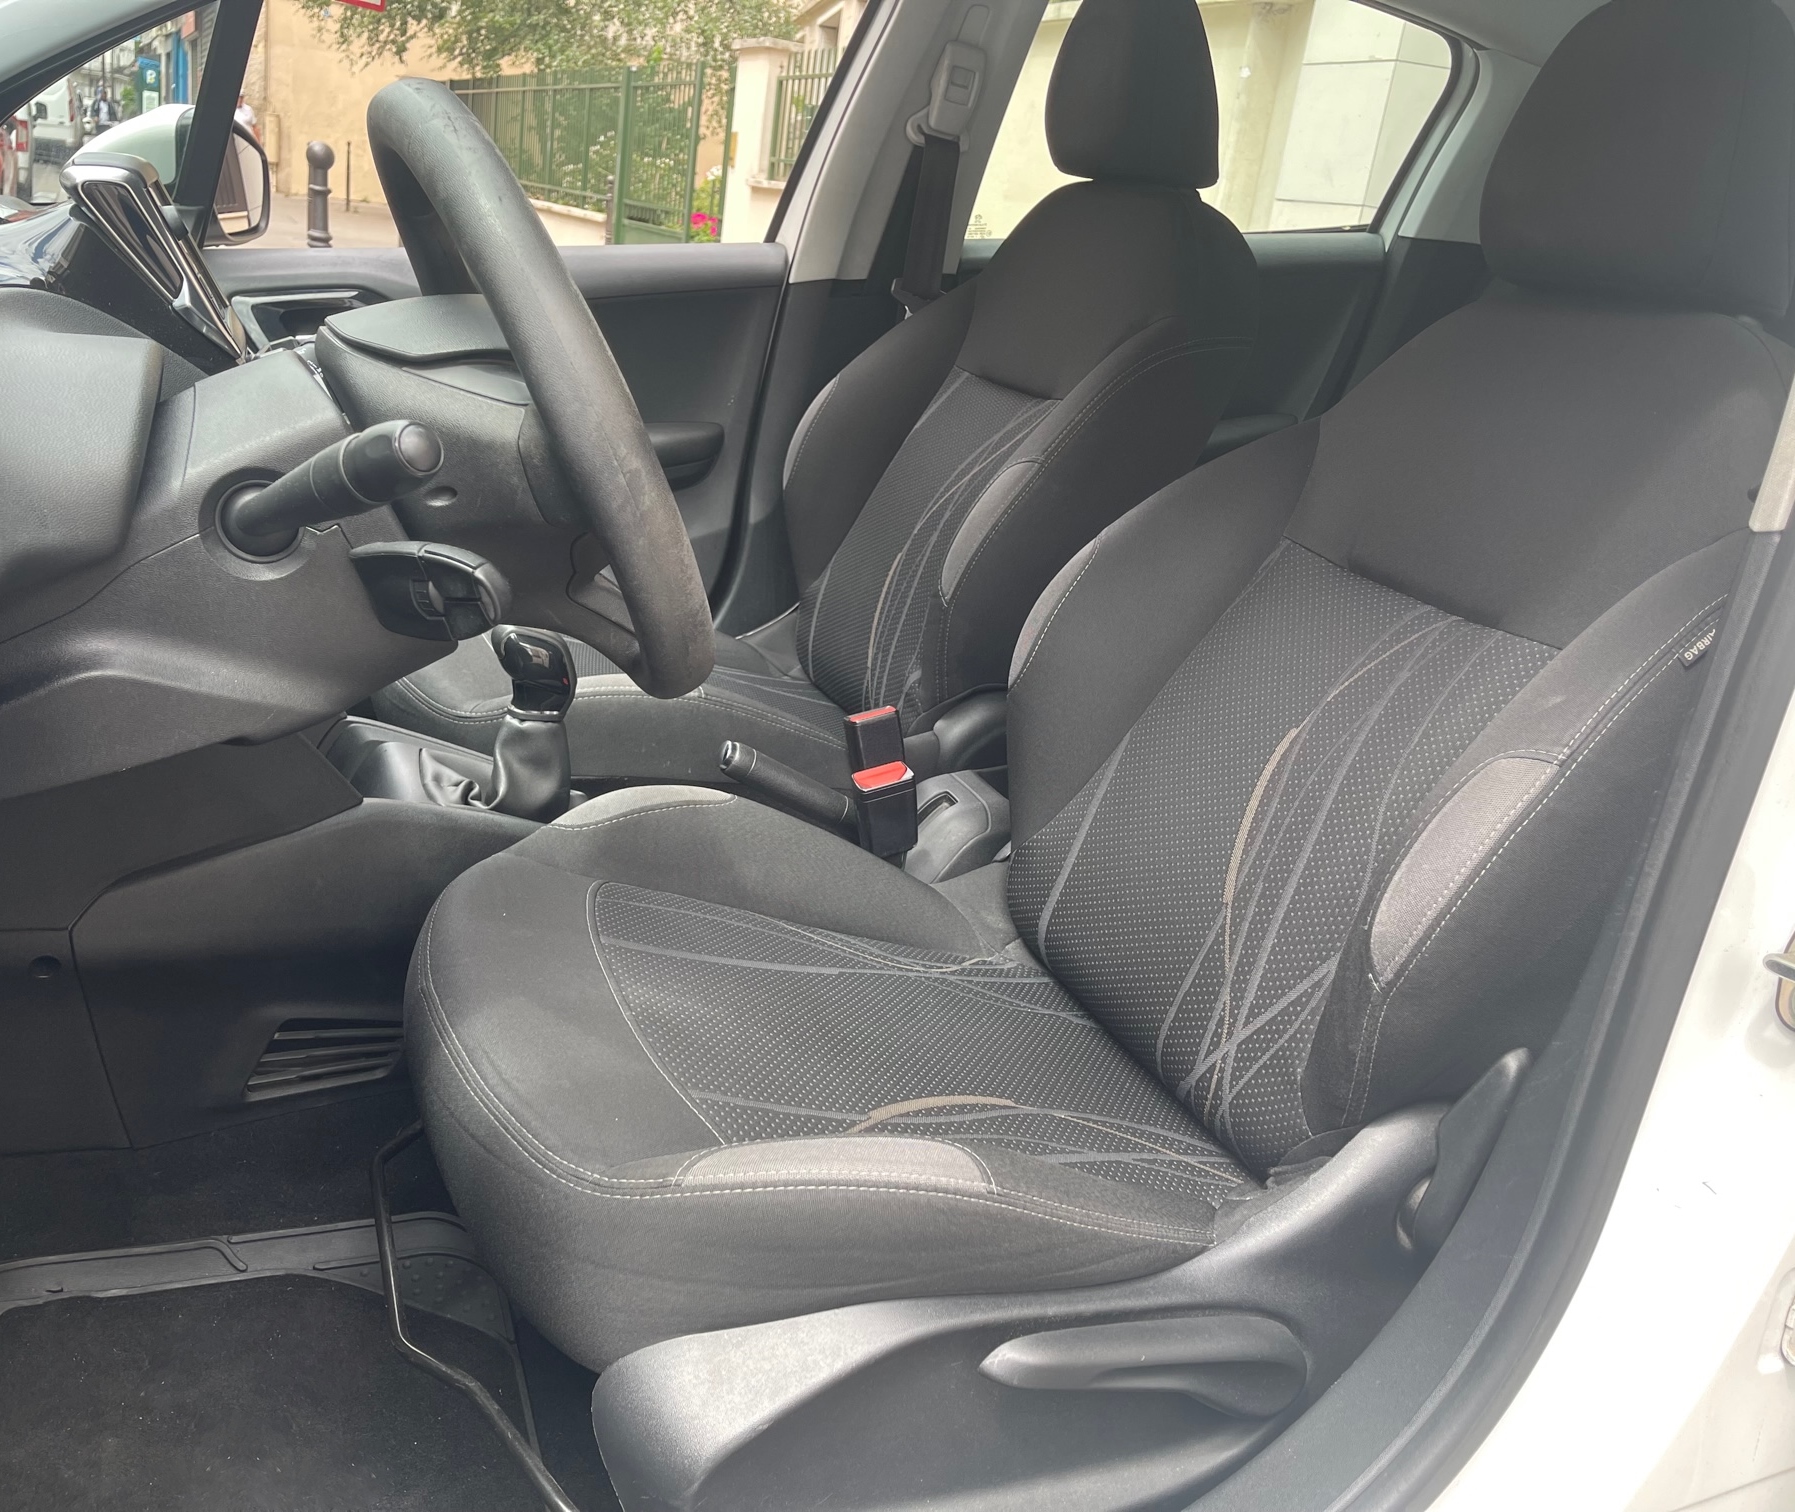 PEUGEOT 208 1.4 HDI 68 ACTIVE 8